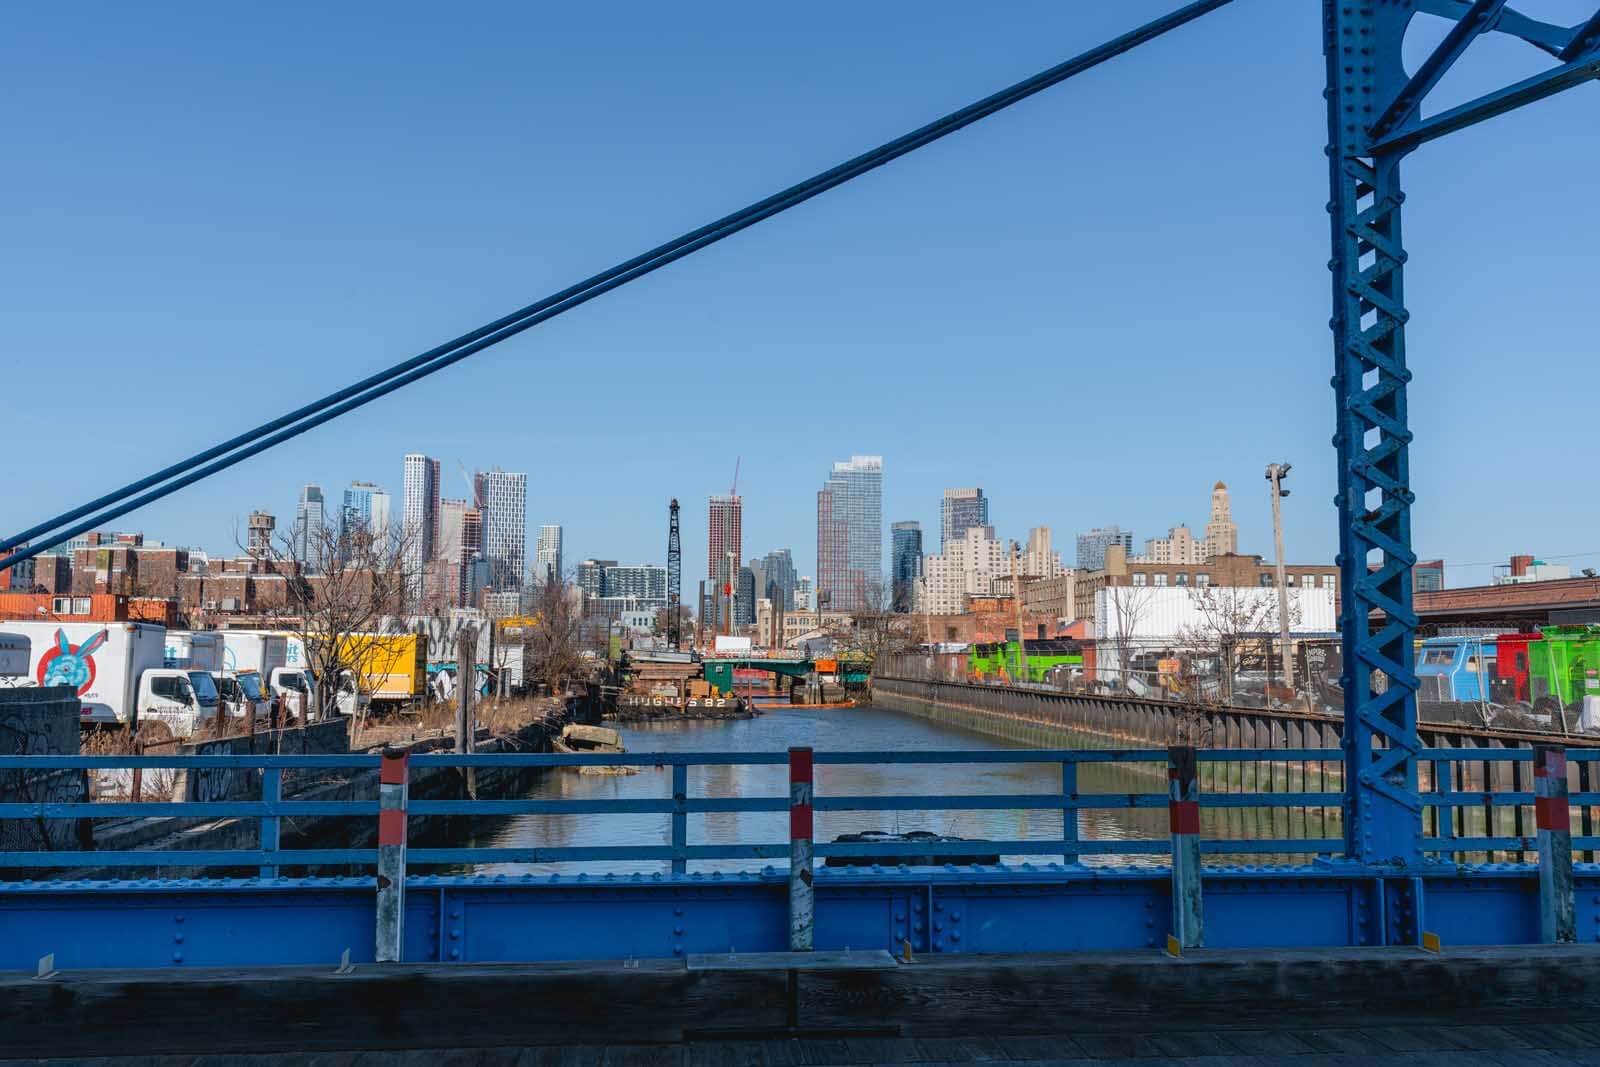 Gowanus Canald and city view in Brooklyn